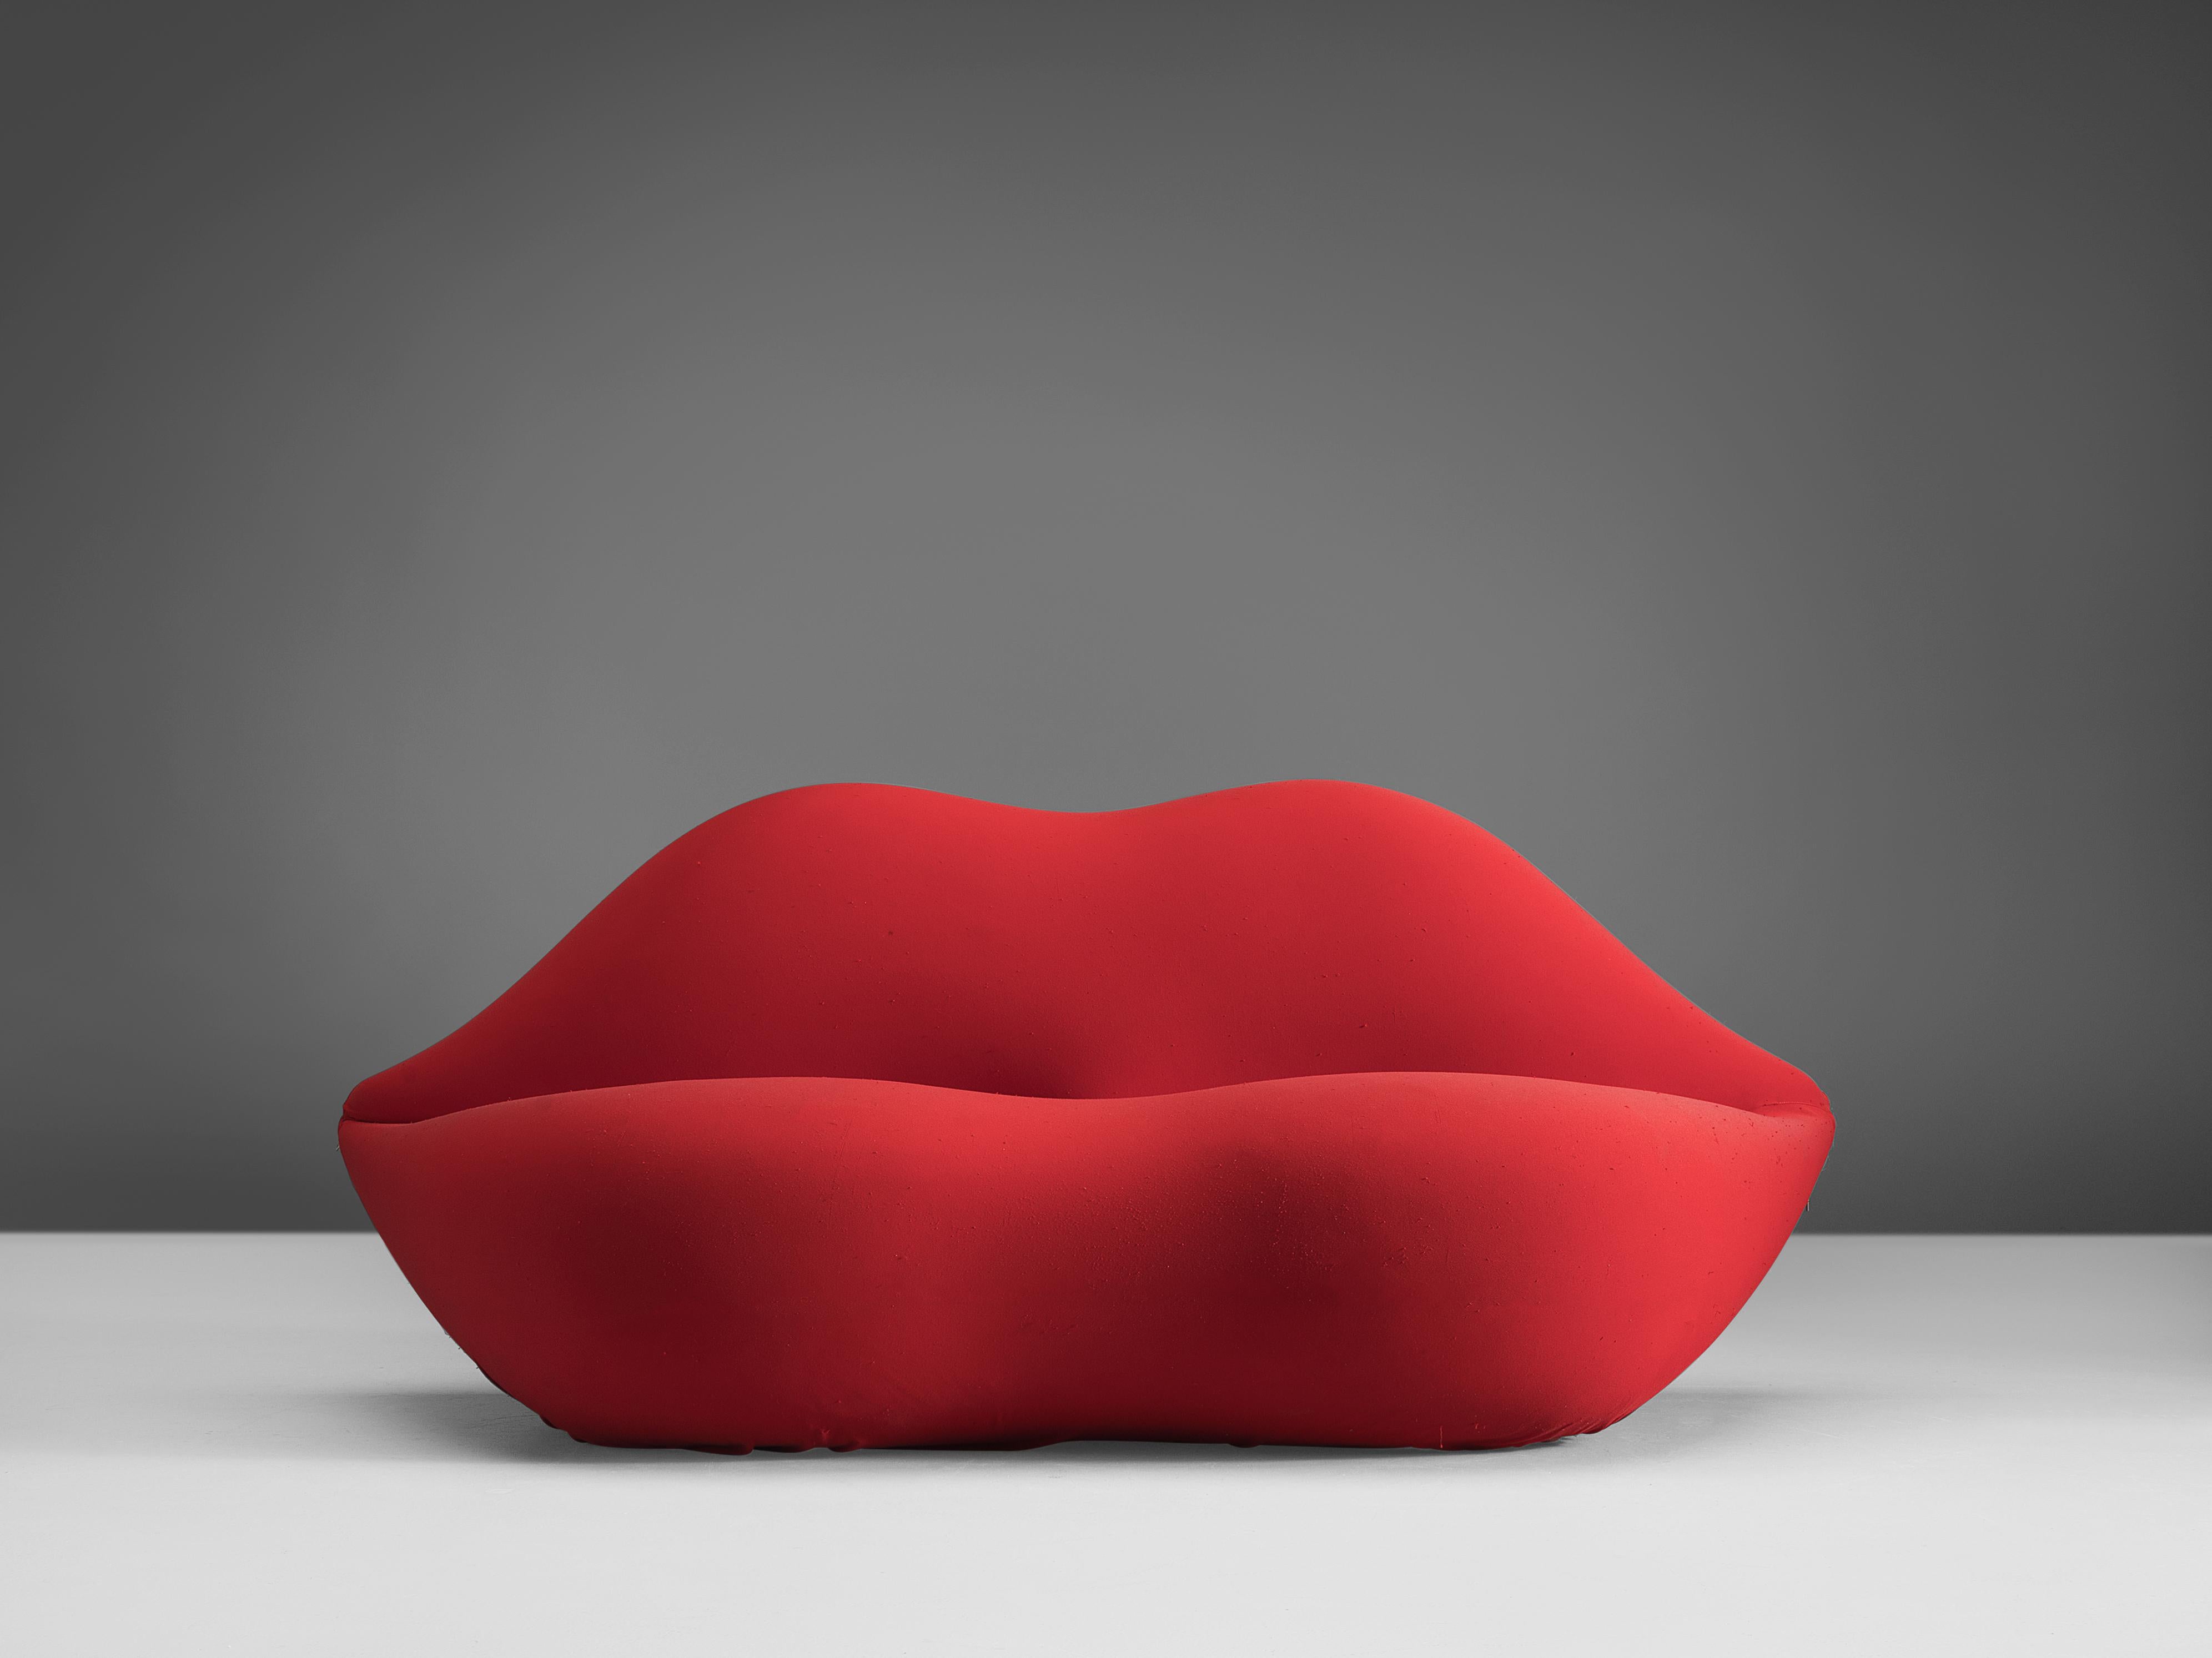 Studio 65 for Edra, sofa model 'Bocca', red fabric, metal frame, foam, Italy, design 1972, manufactured 1999

The Studio 65 'Bocca' sofa by Gufram is an icon of postmodern furniture design. Studio 65 created this special shaped sofa as an hommage to